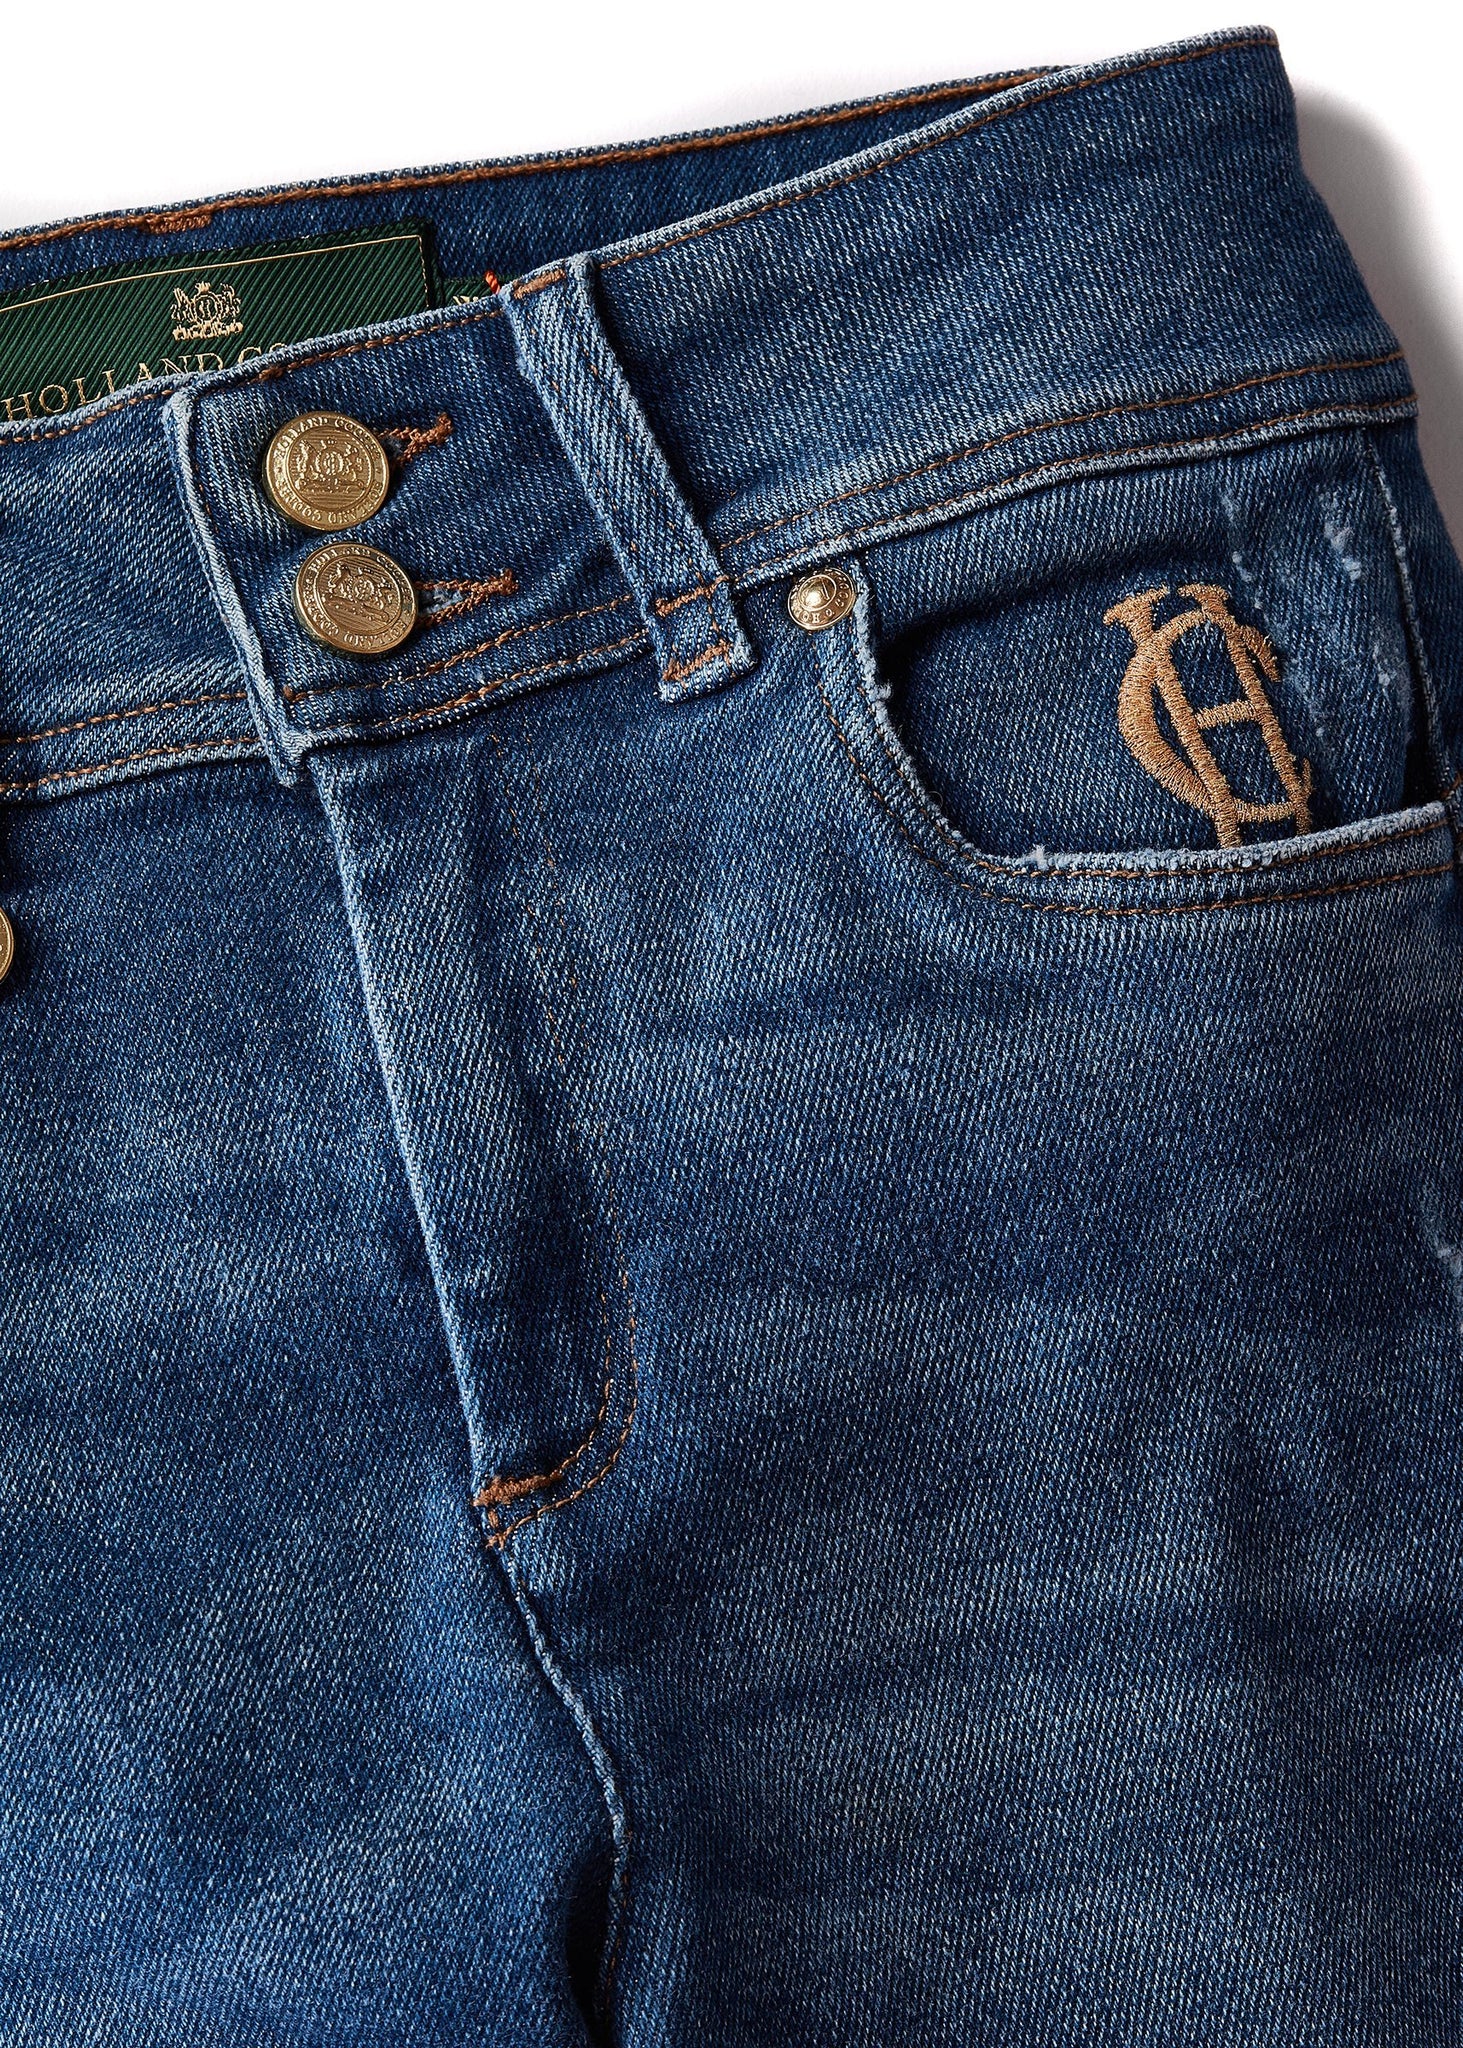 hc embroidery detail on front left pocket on womens high rise blue distressed denim skinny stretch jean with jodhpur style seams and two open pockets to the front